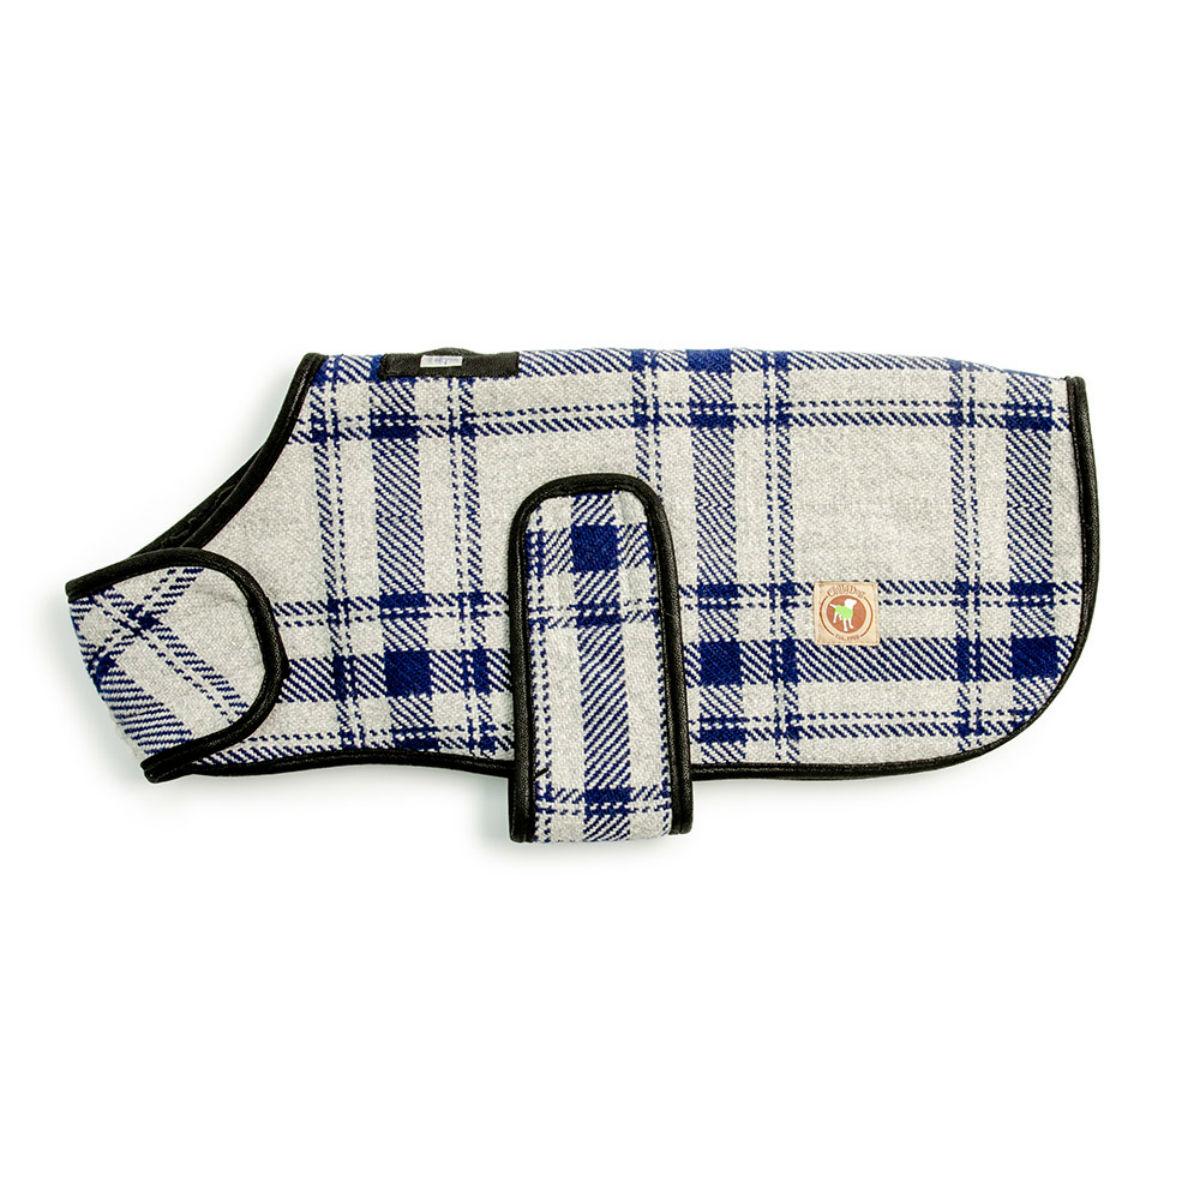 Chilly Dog Plaid Blanket Dog Coat - Gray and Blue